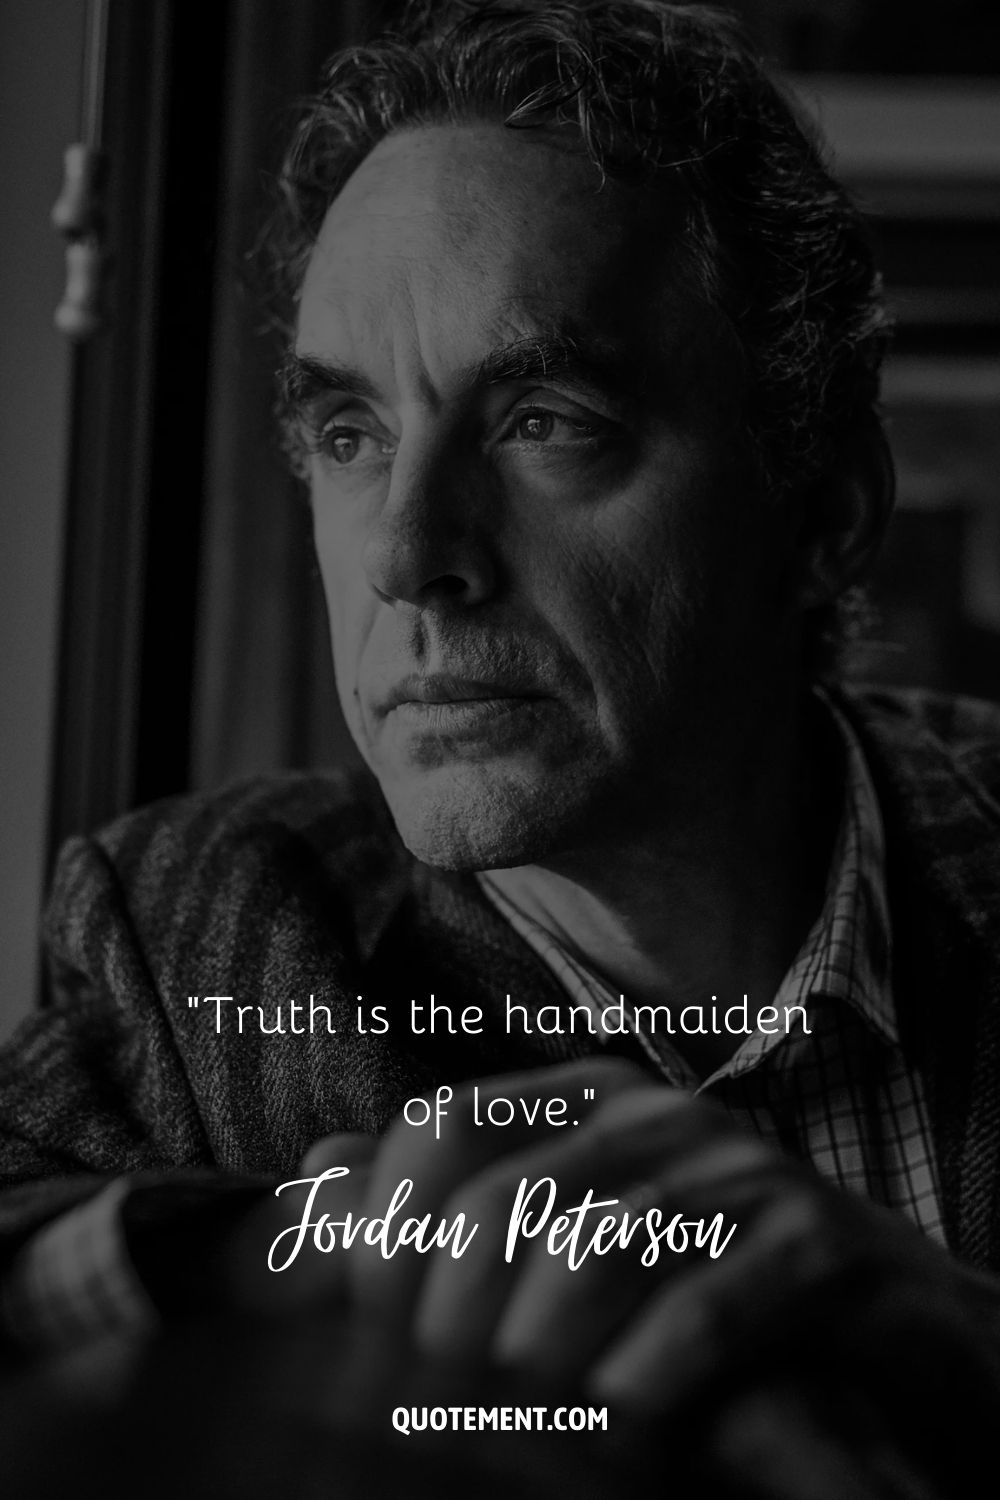 Jordan Peterson quote about truth.